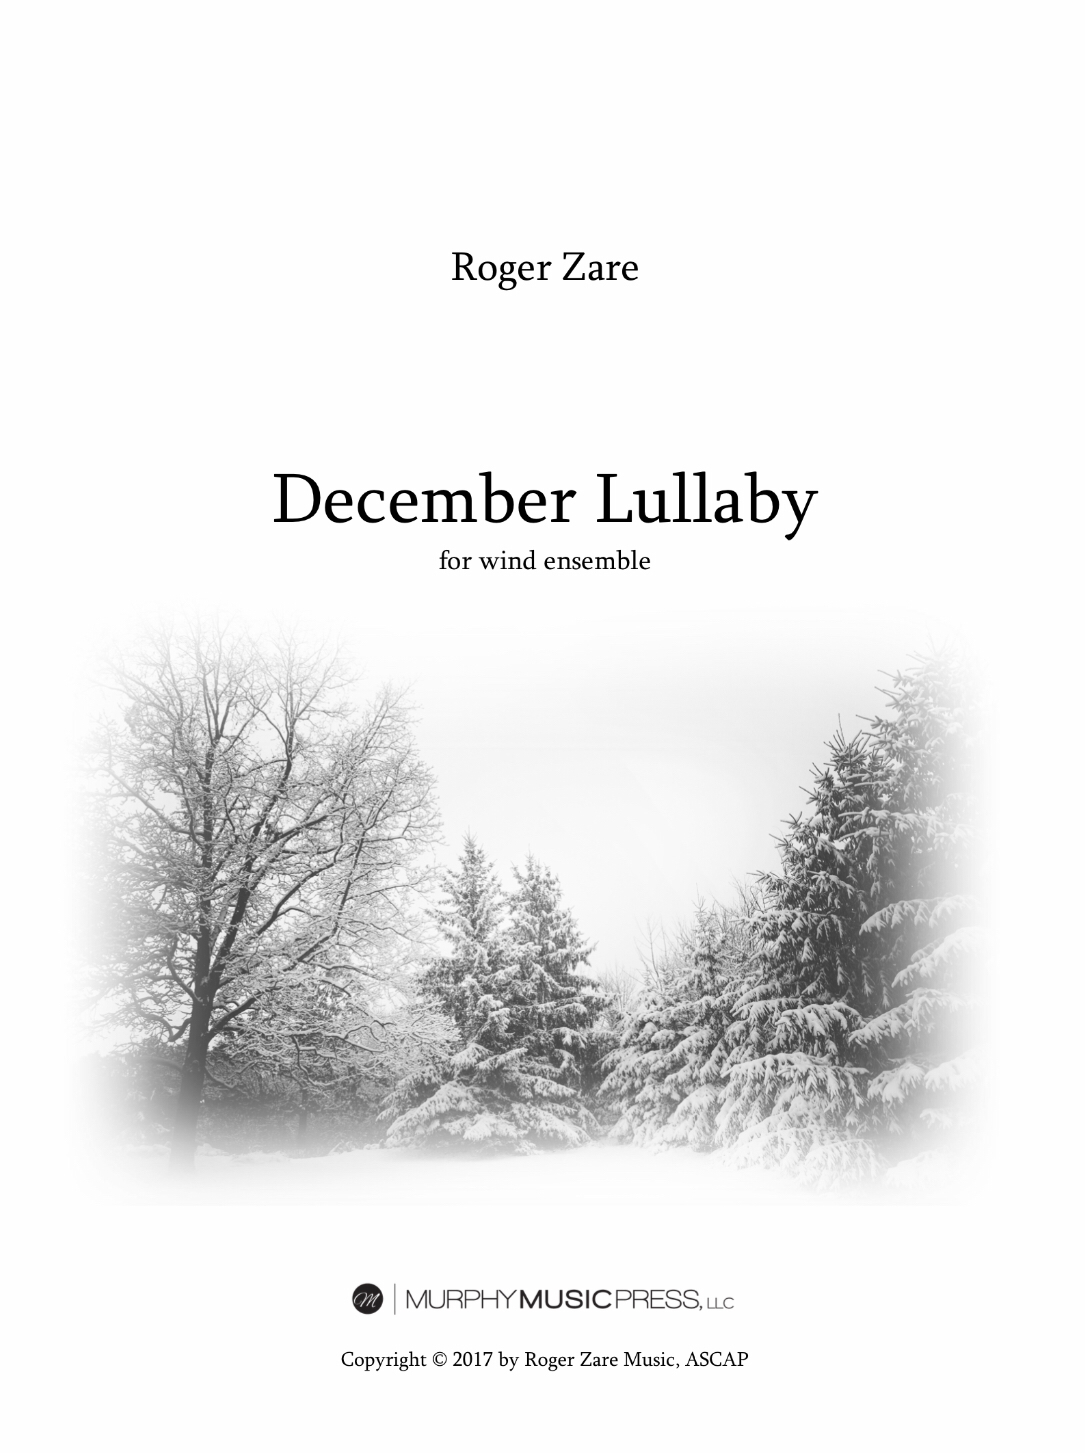 December Lullaby (Score Only) by Roger Zare